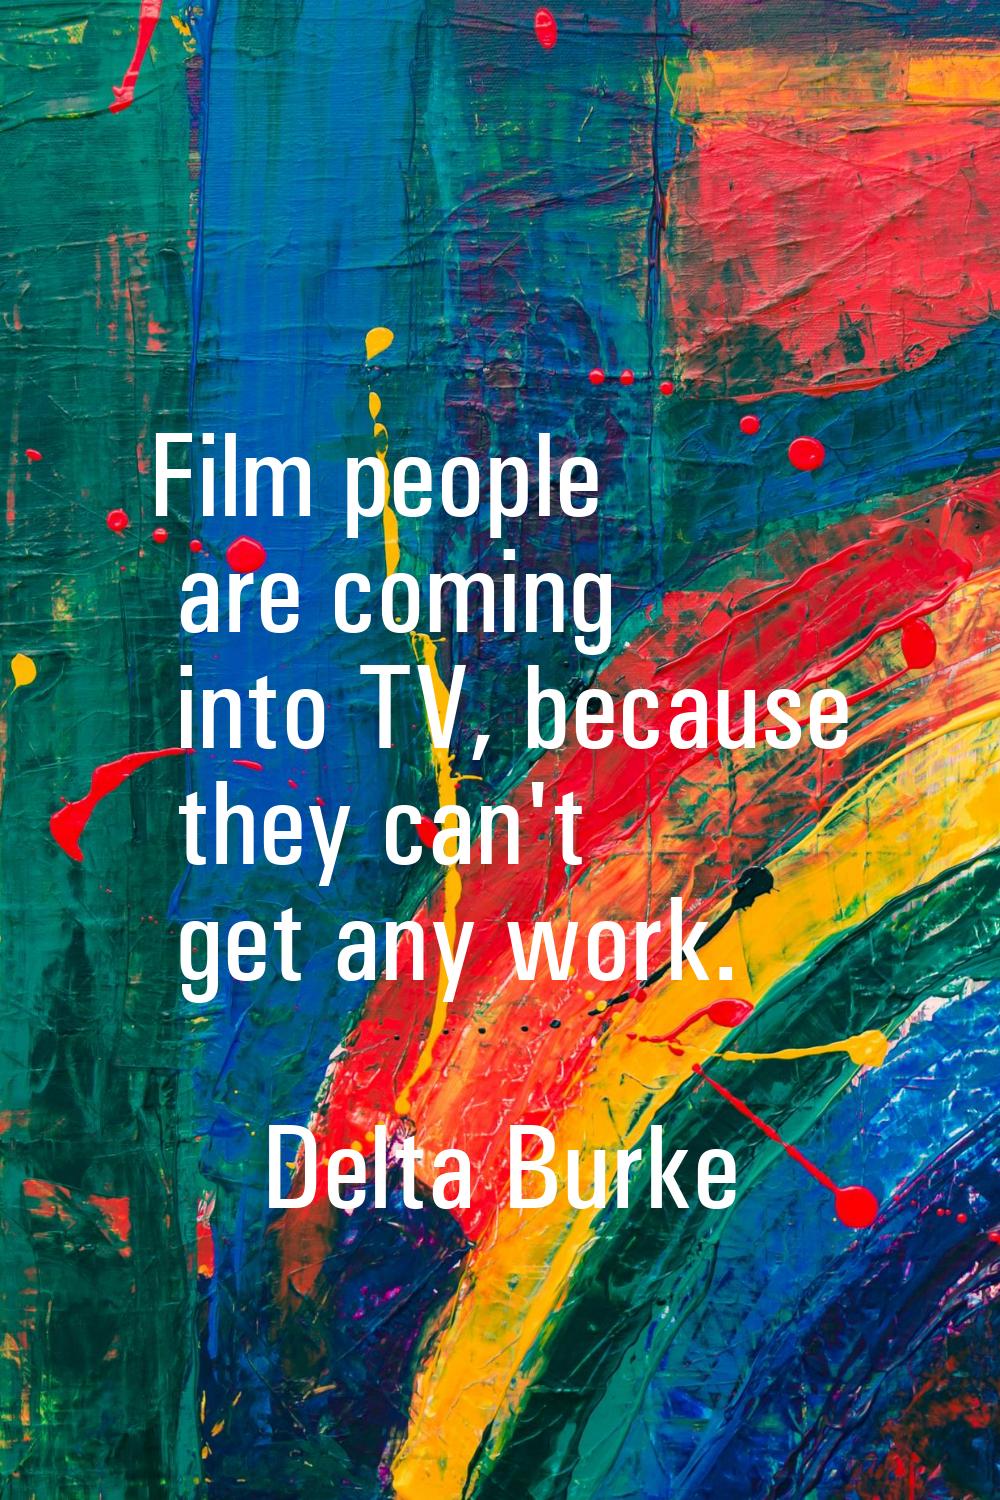 Film people are coming into TV, because they can't get any work.